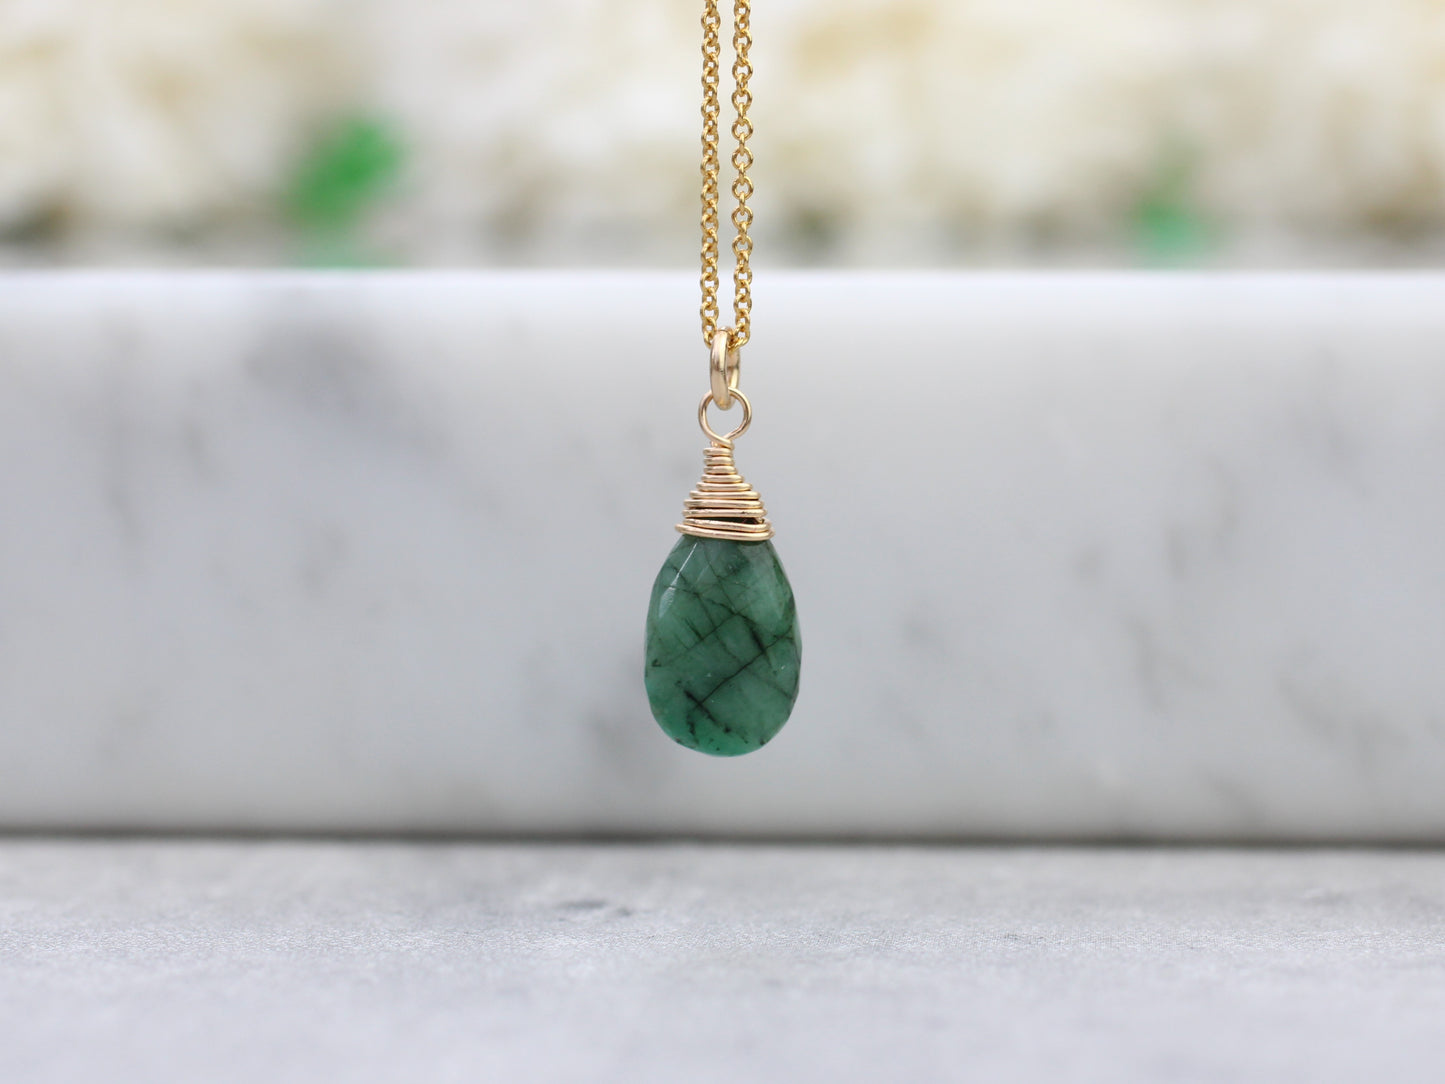 emerald necklace in silver or gold